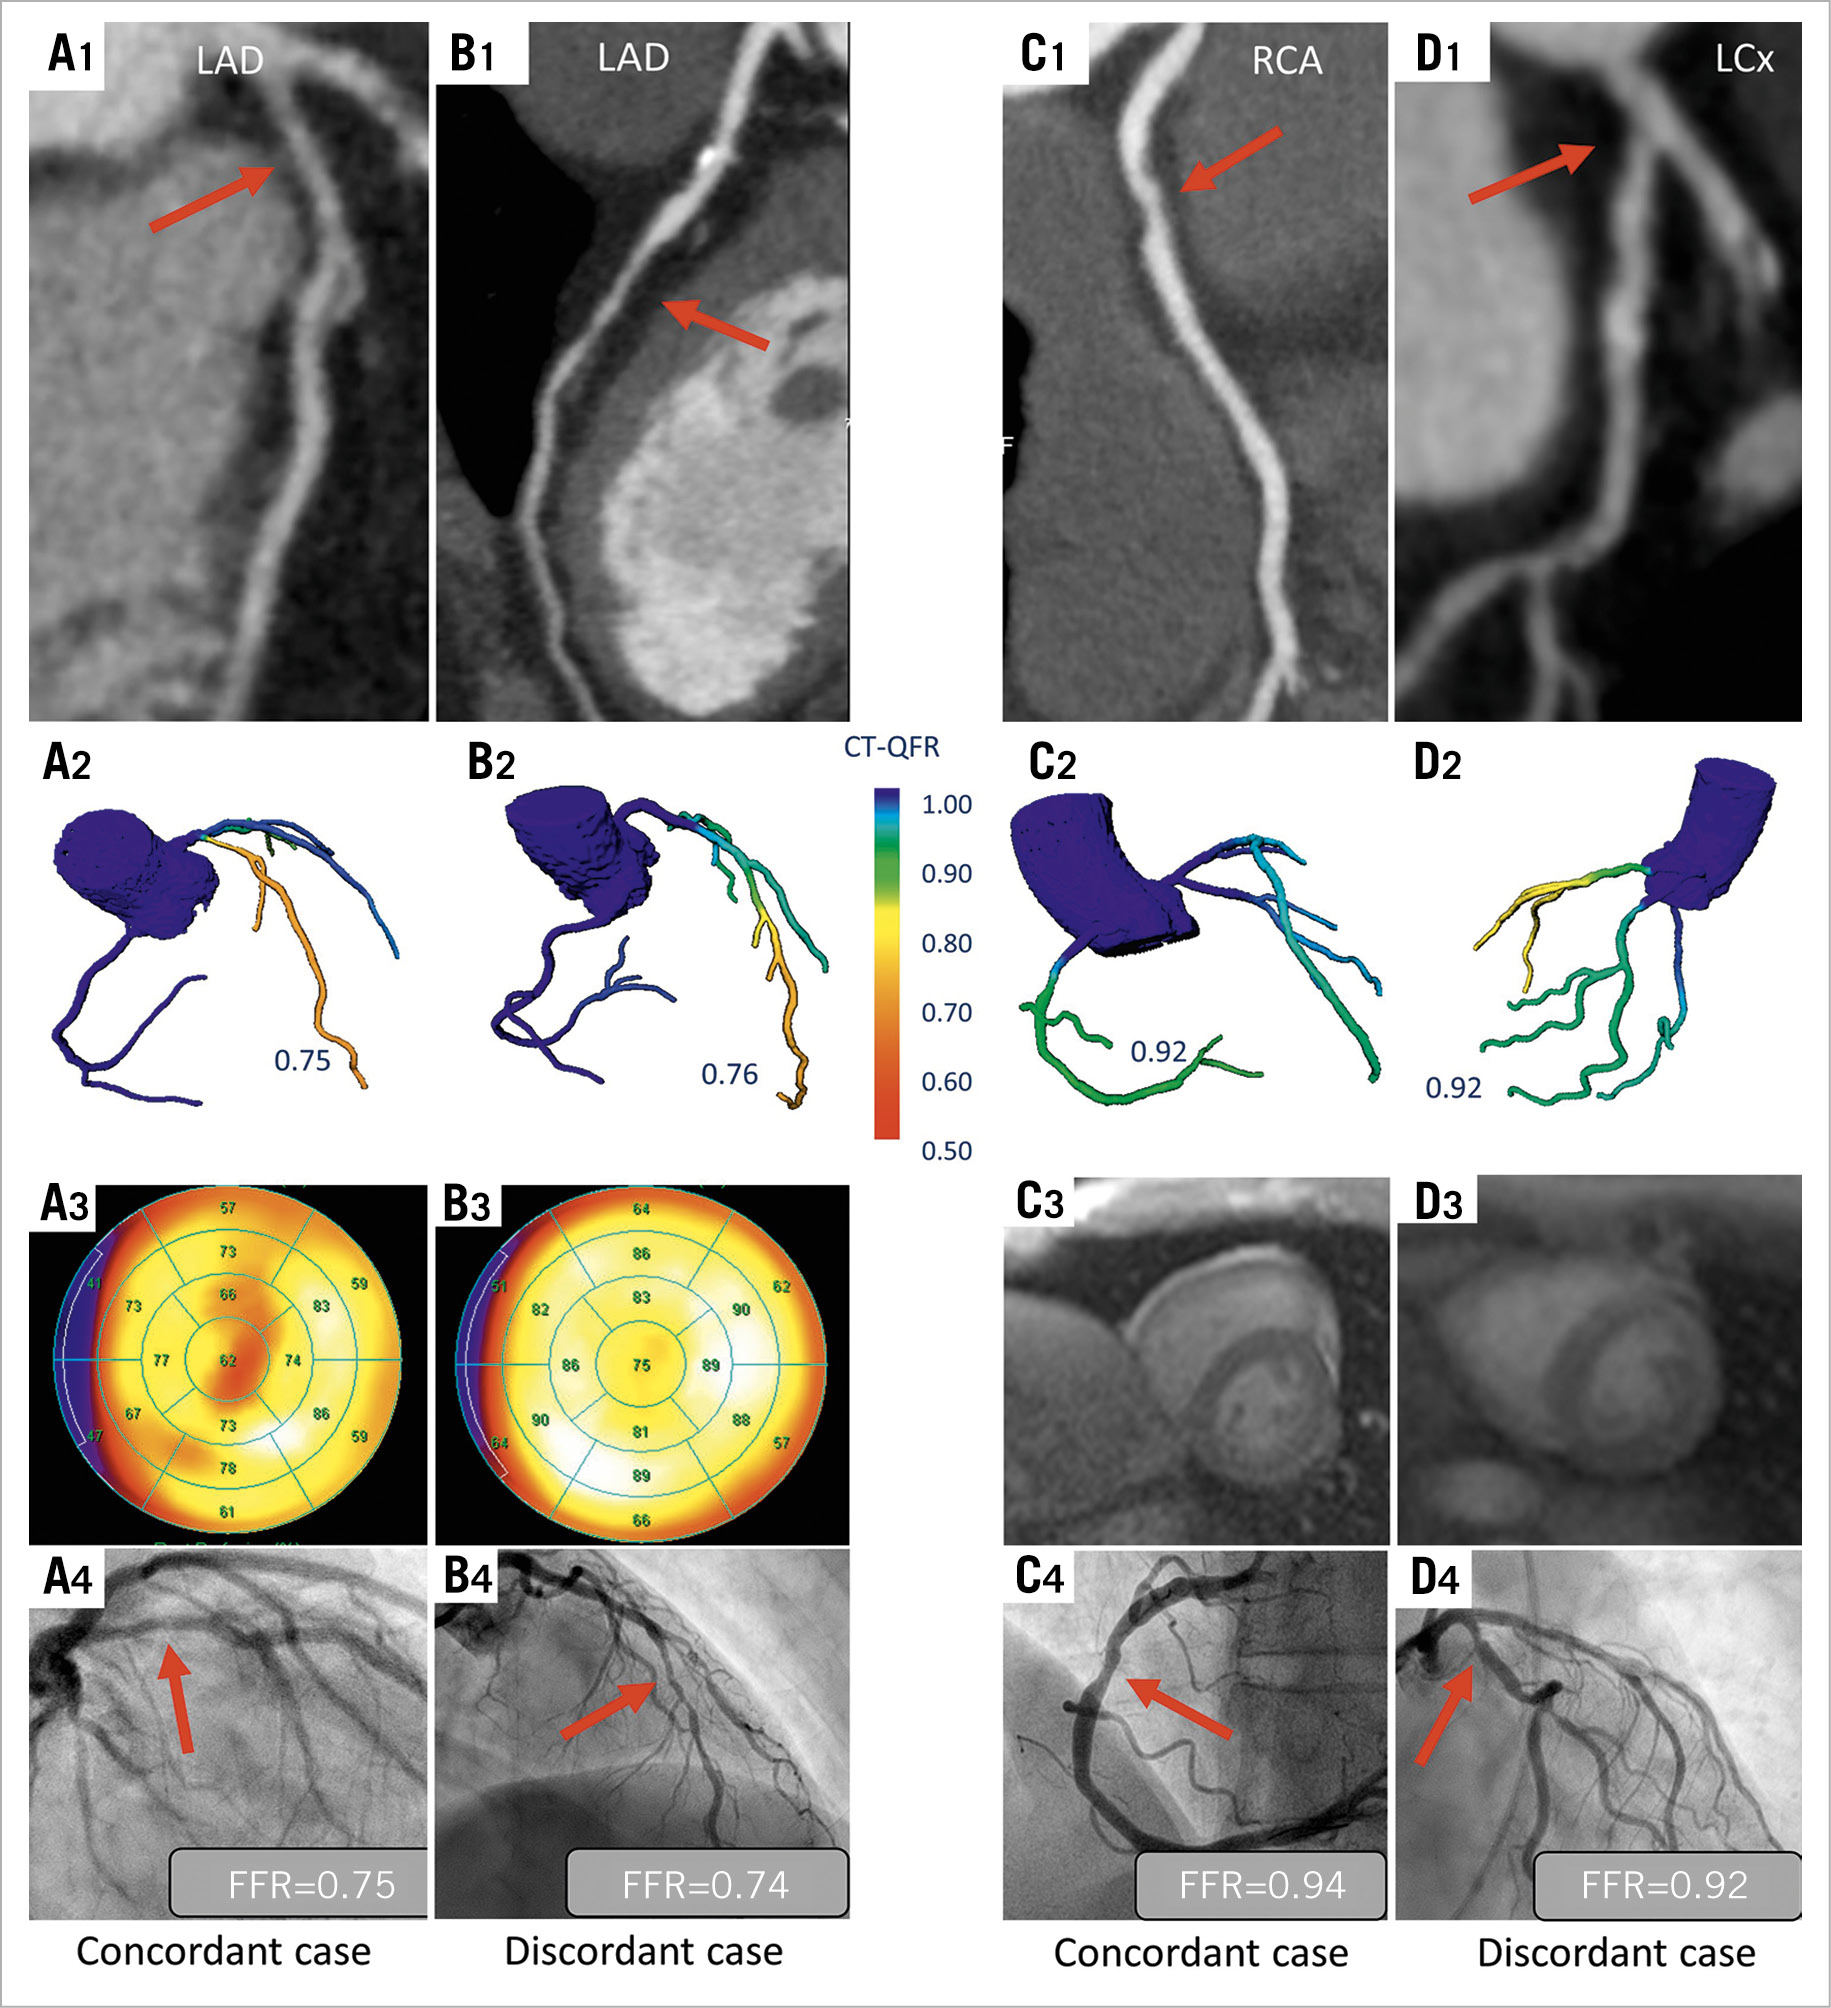 Figure 3. Illustrative examples of four study patients. A1-A4 indicate coronary CTA-identified intermediate stenosis on the LAD (A1) considered obstructive by CT-QFR (A2), MPS (A3) and invasive FFR (A4). B1-B4 indicate calcified and soft plaques on coronary CTA (B1) considered obstructive by CT-QFR (B2) and invasive FFR (B4) but not by MPS (B3). C1-C4 indicate coronary CTA-identified intermediate stenosis on the RCA (C1) not considered obstructive by CT-QFR (C2), CMR (C3) and invasive FFR (C4). D1-D4 indicate plaques on coronary CTA (D1) not considered obstructive by CT-QFR (D2) and invasive FFR (D4) but obstructive by CMR (D3). CT-QFR: CT-derived quantitative flow ratio; FFR: fractional flow reserve; ICA: invasive coronary angiography; LAD: left anterior descending artery; LCx: left circumflex artery; RCA: right coronary artery